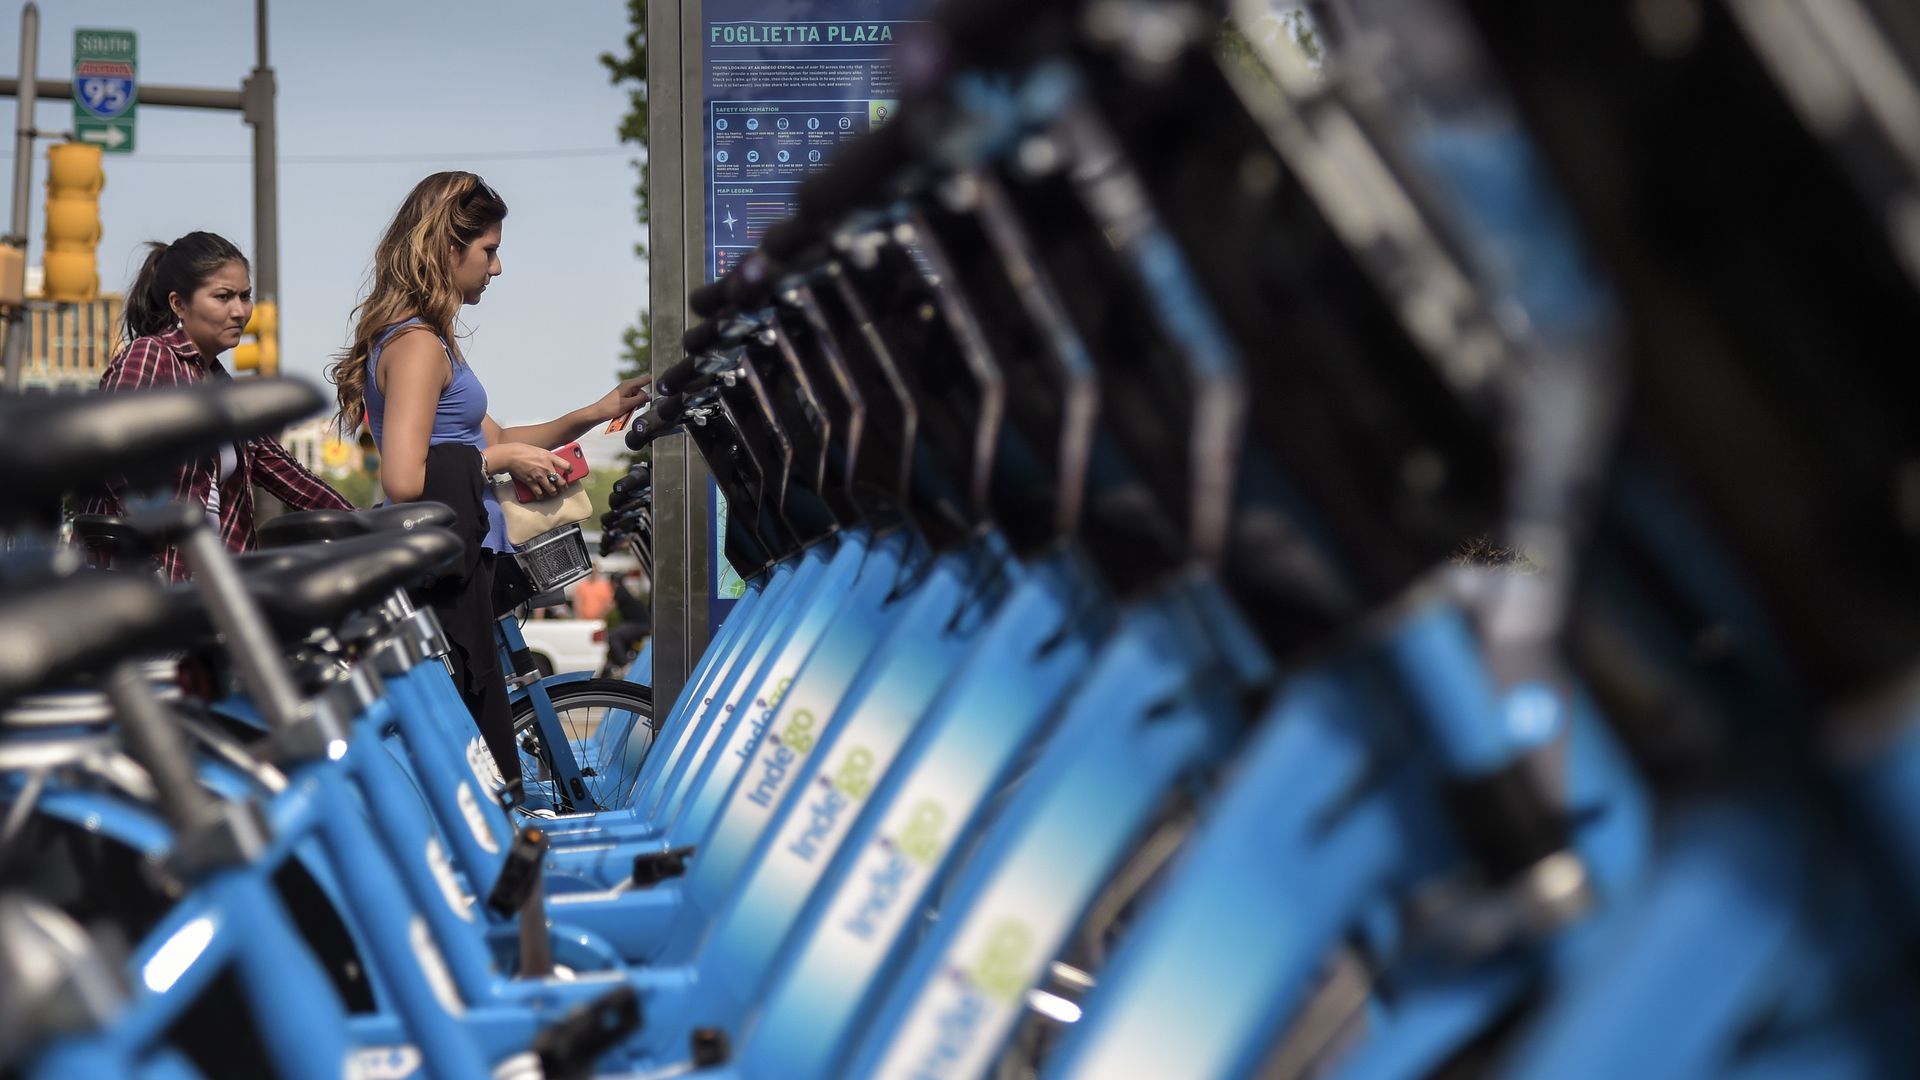 A row of Indego bikes at a docking station.